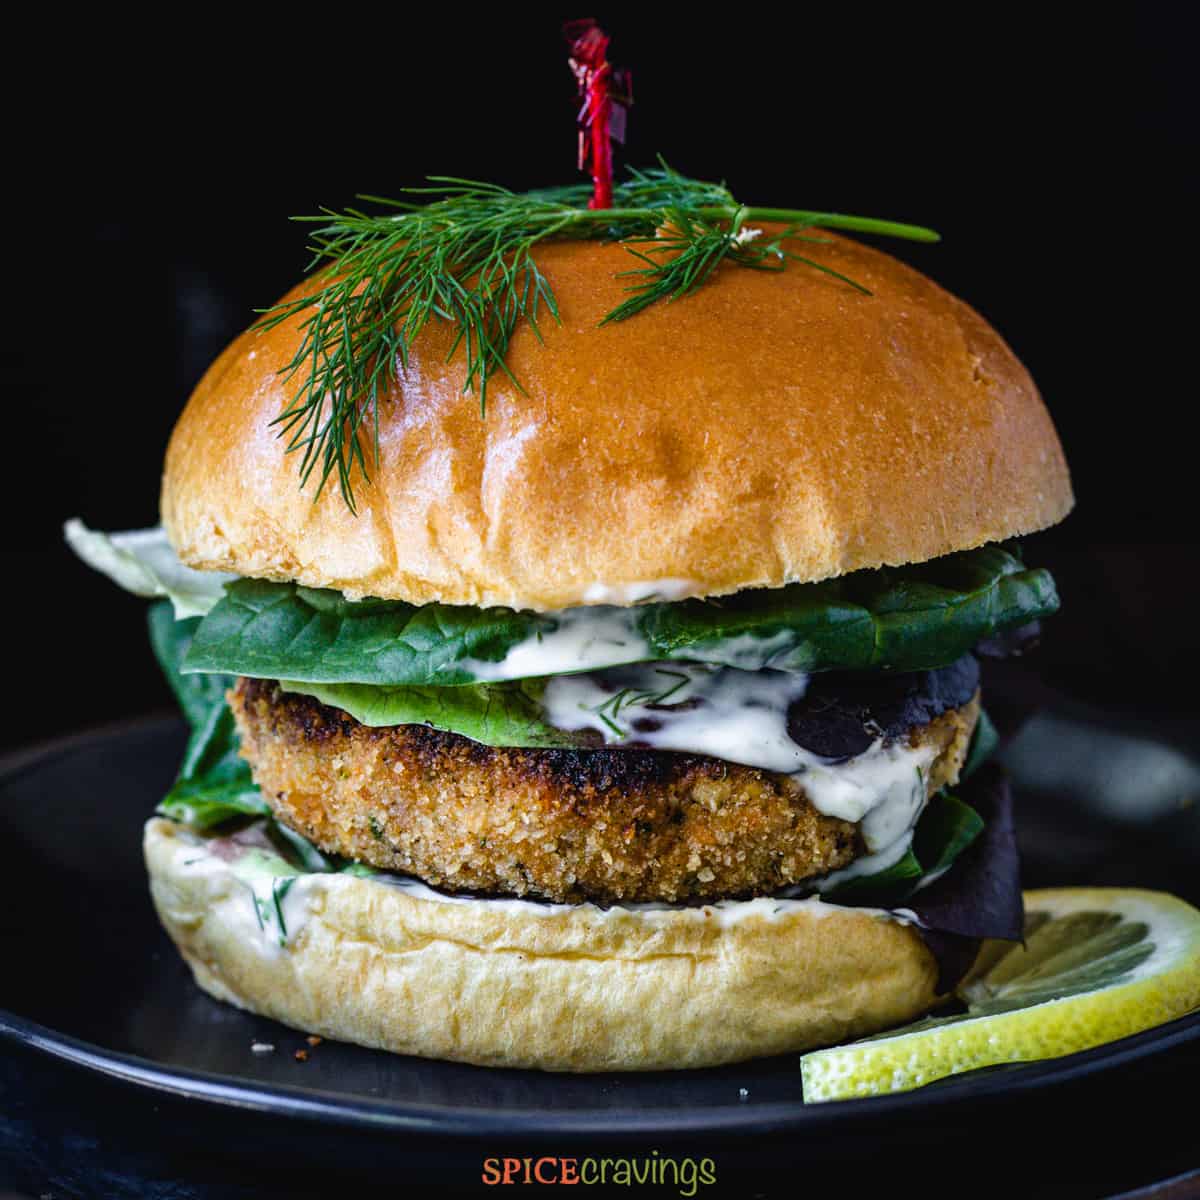 Salmon burger with dill topping and mayonnaise dripping down the patty.